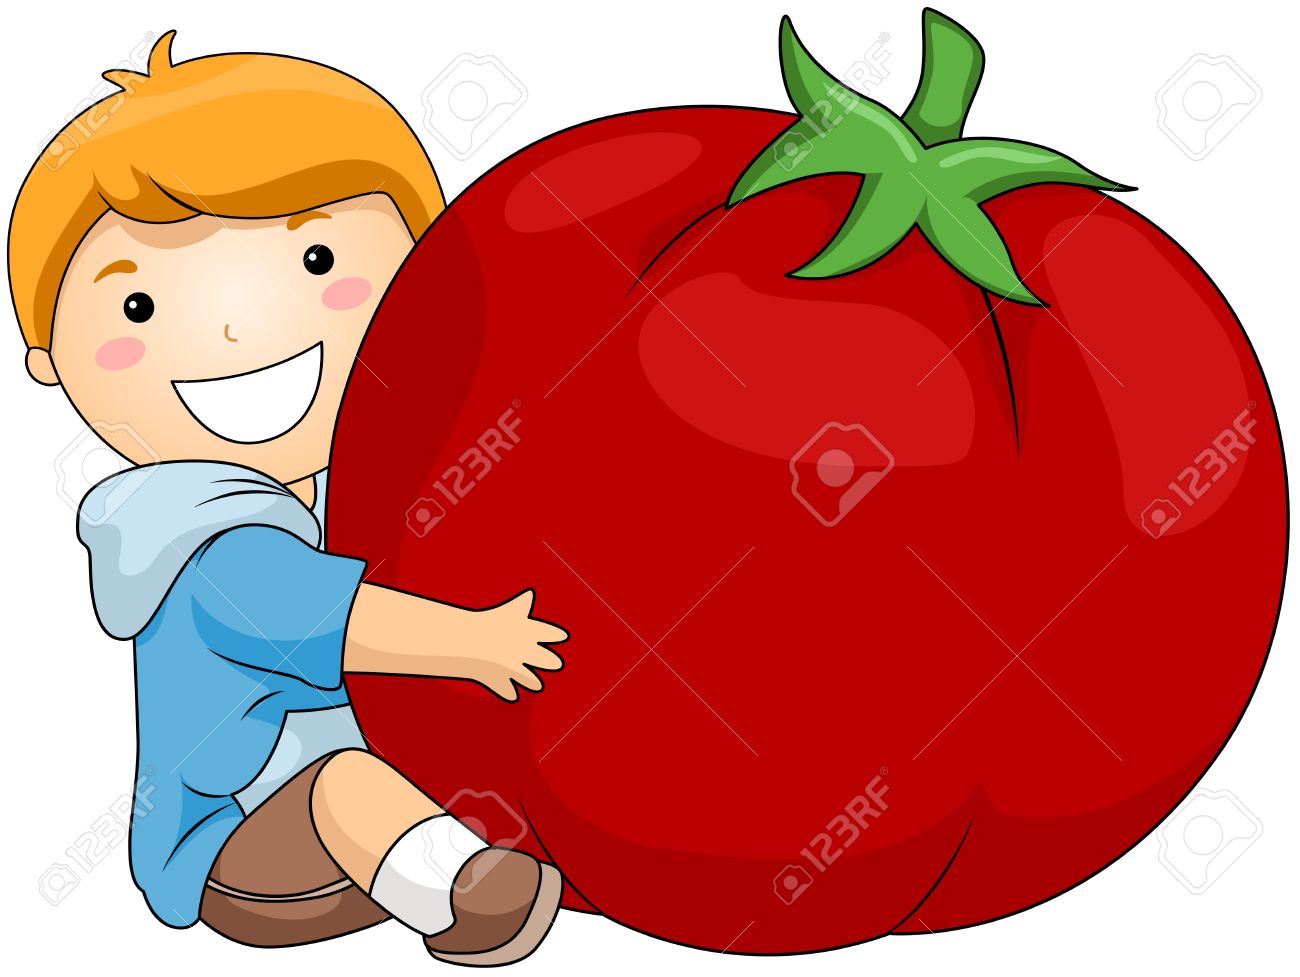 tomatoes clipart real